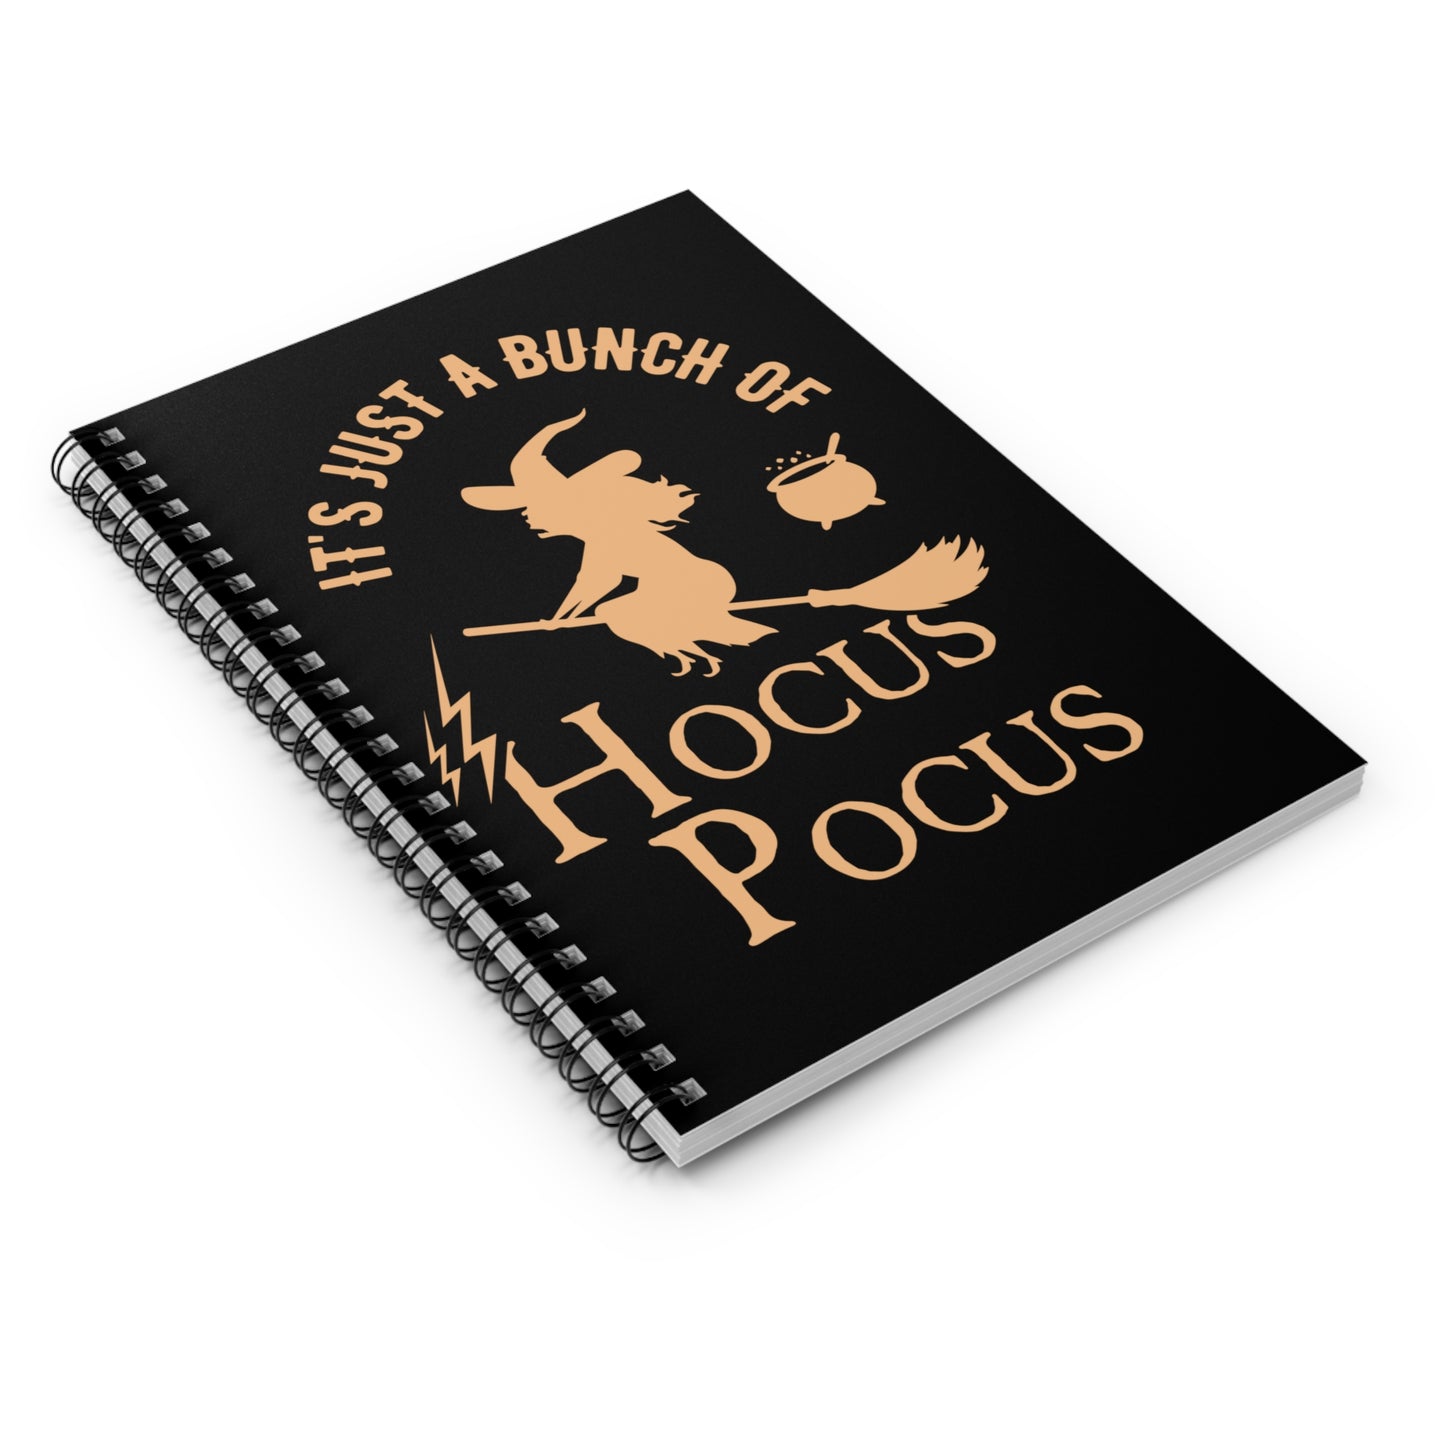 Just a Bunch of Hocus Pocus Spiral Notebook - Ruled Line